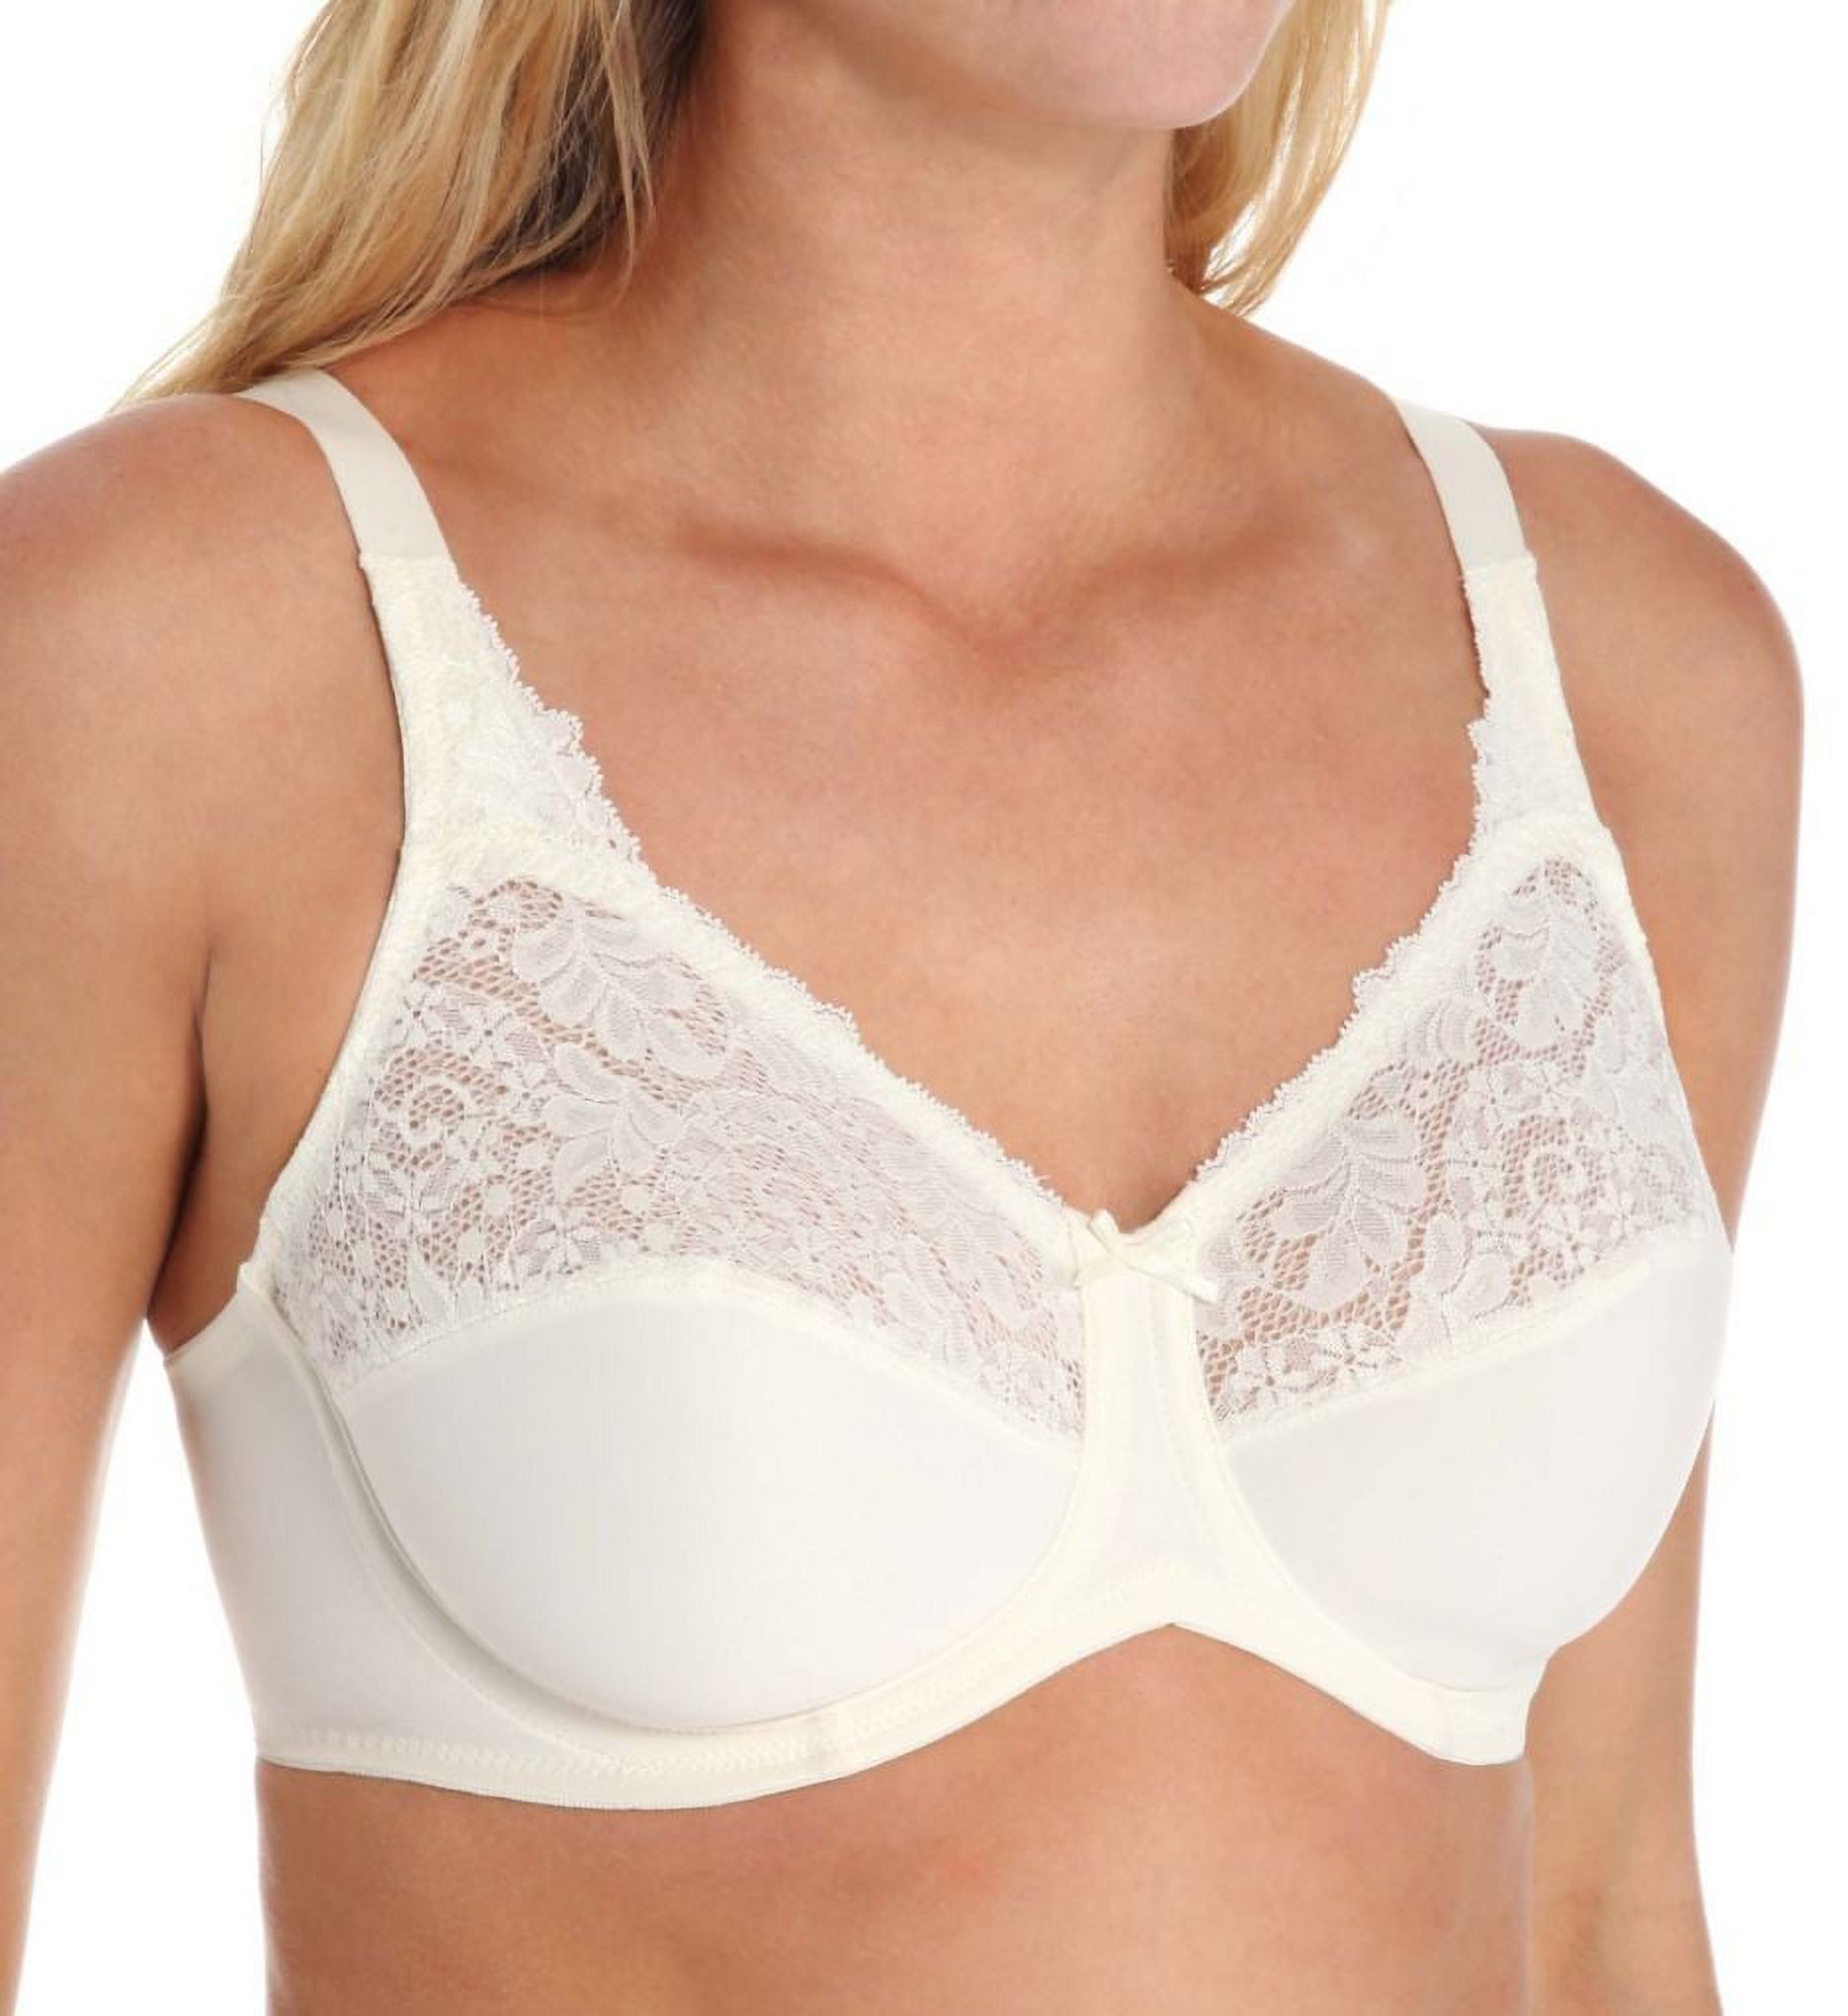 Lilyette By Bali Minimizer Underwire Bra Womens Full Coverage Seamless LY0428 - image 1 of 3